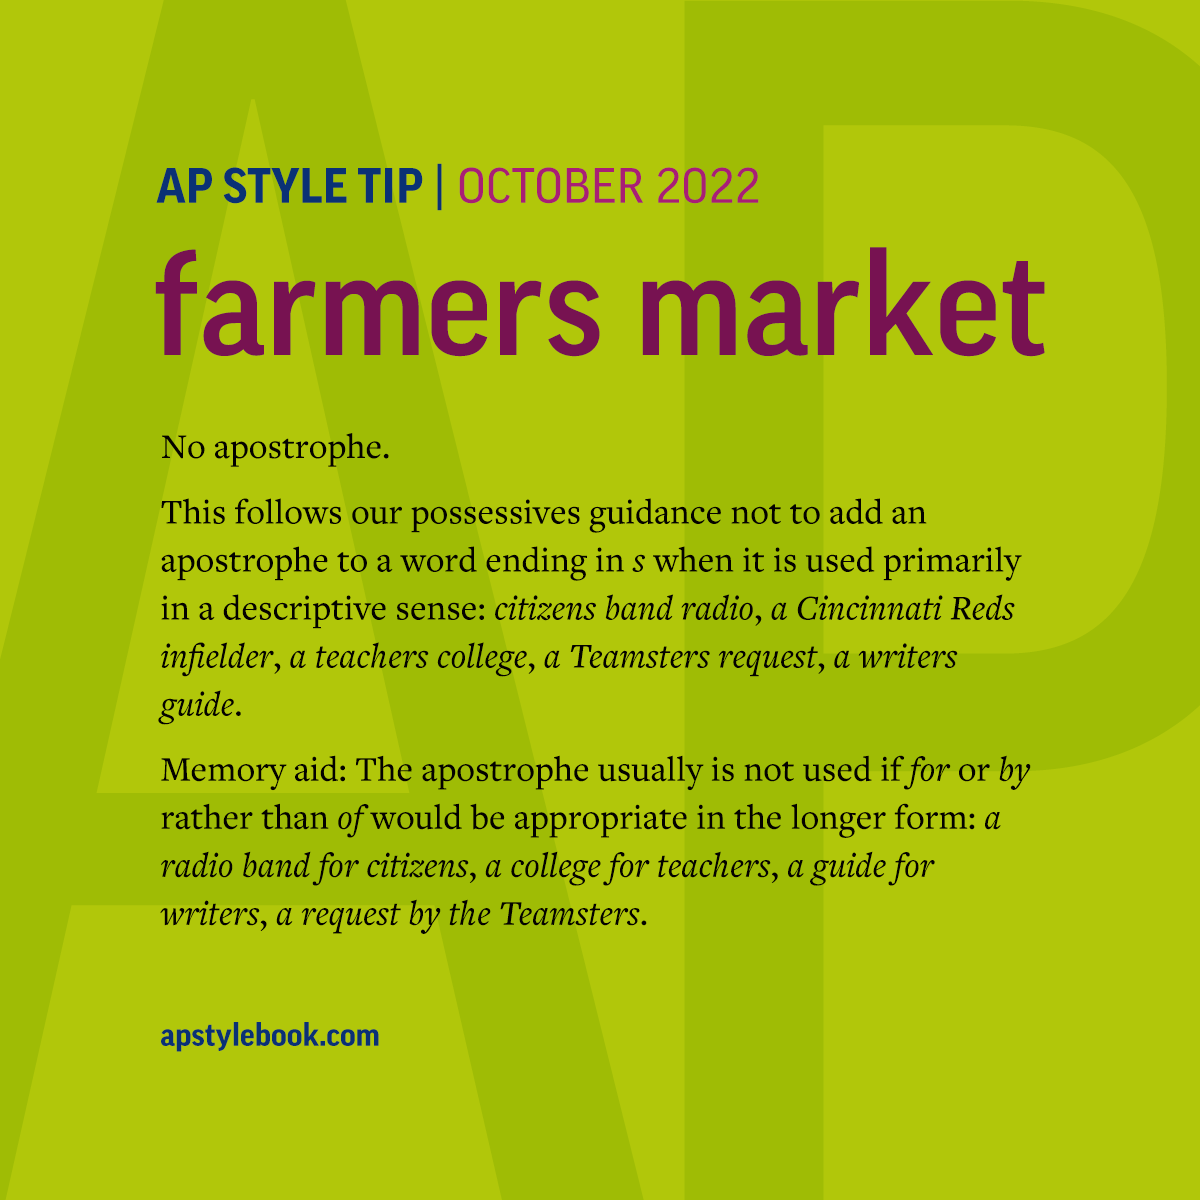 If you go to the farmers market this fall, you don't need an apostrophe. This follows our possessives guidance not to add an apostrophe to a word ending in s when it is used primarily in a descriptive sense: a Cincinnati Reds infielder, a teachers college, a writers guide.